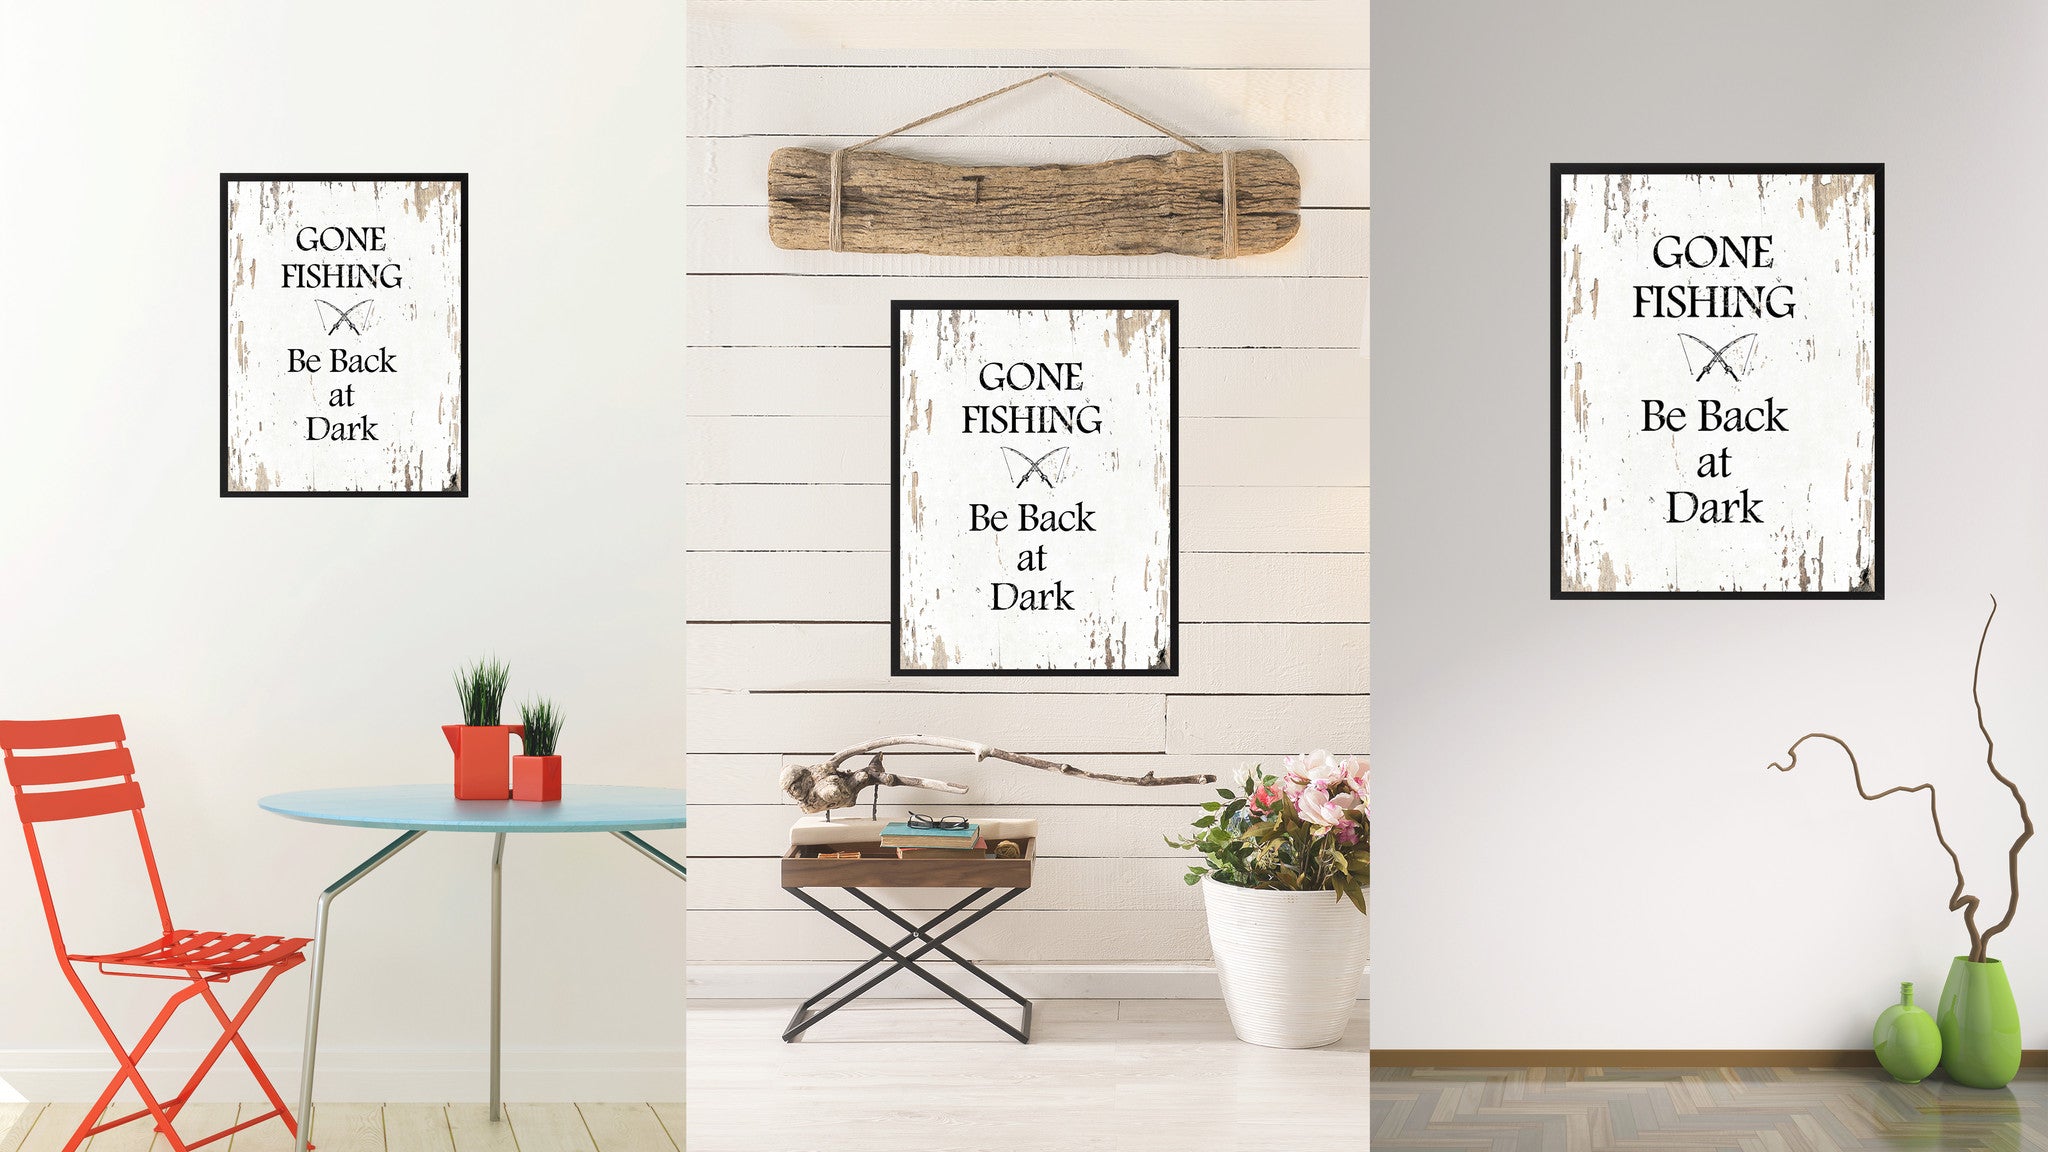 Gone fishing be back at dark  Quote Saying Gift Ideas Home Decor Wall Art